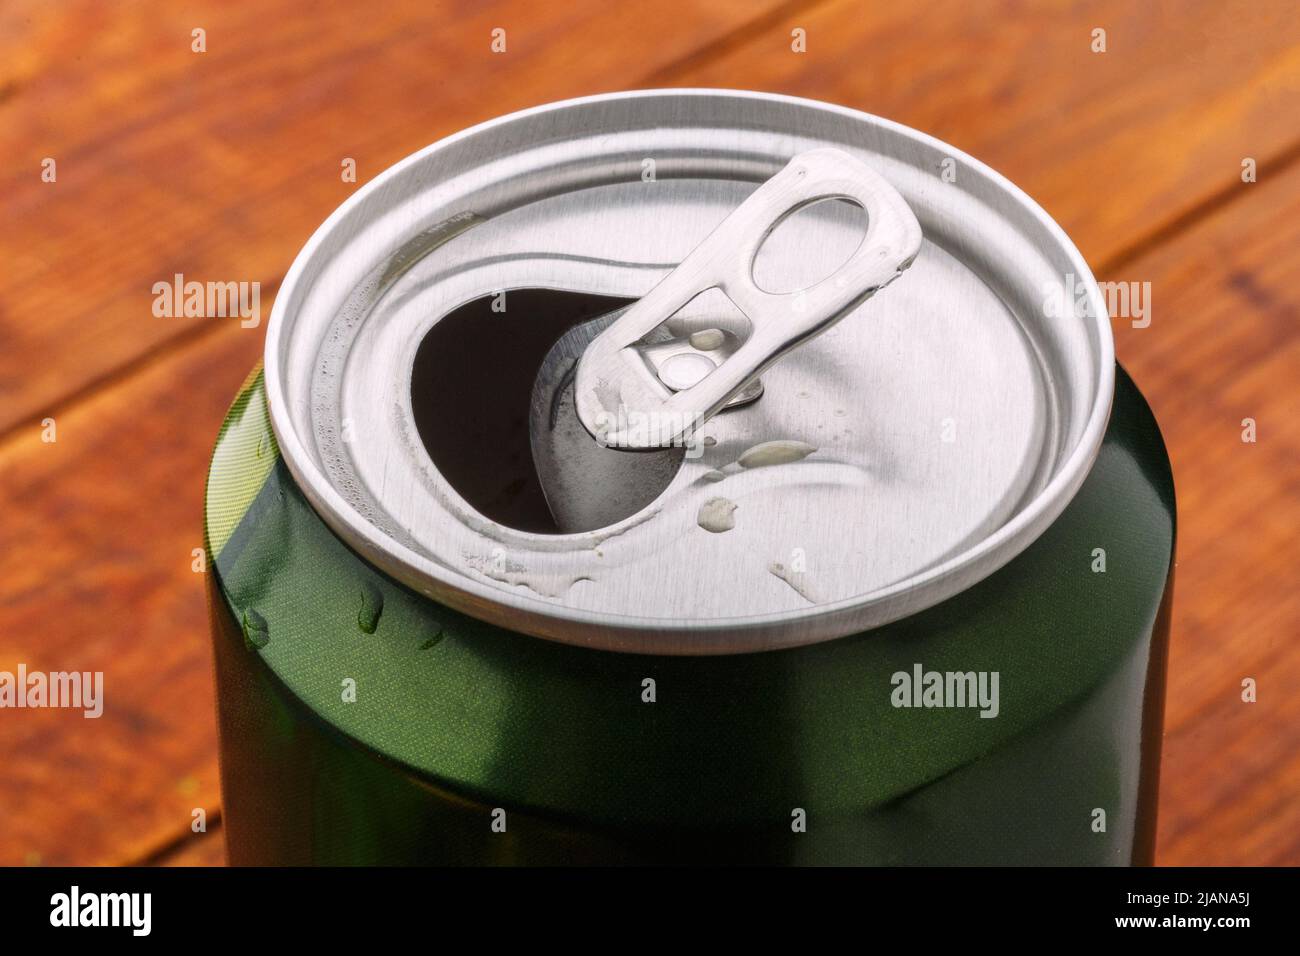 Can with drink view from the top. Green open soda aluminum can. Shiny metalic beer container close up Stock Photo